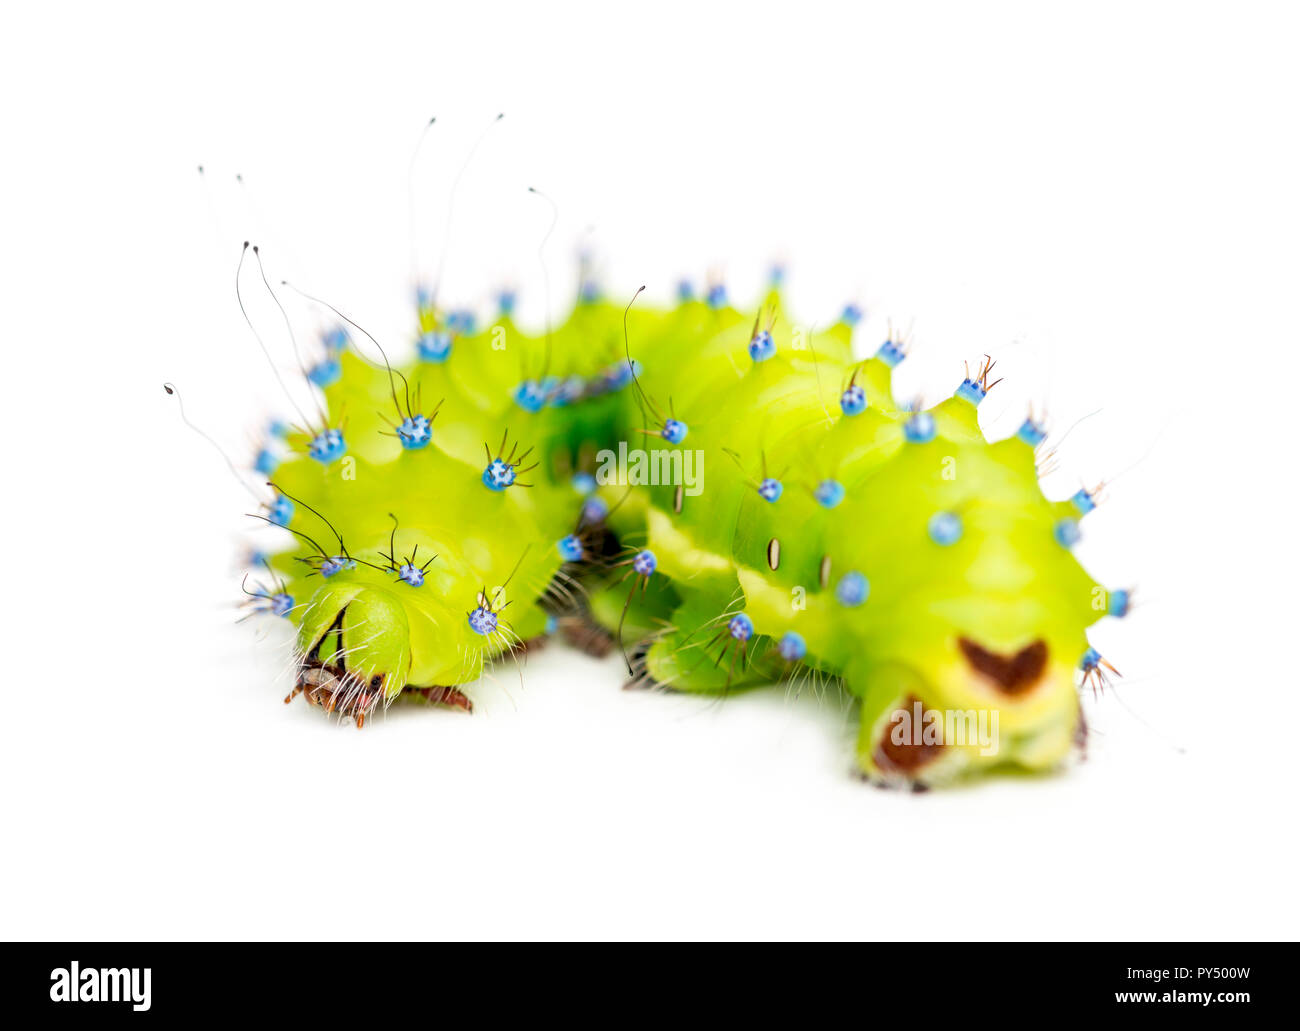 Caterpillar of the Giant Peacock Moth, Saturnia pyri, against white background Stock Photo